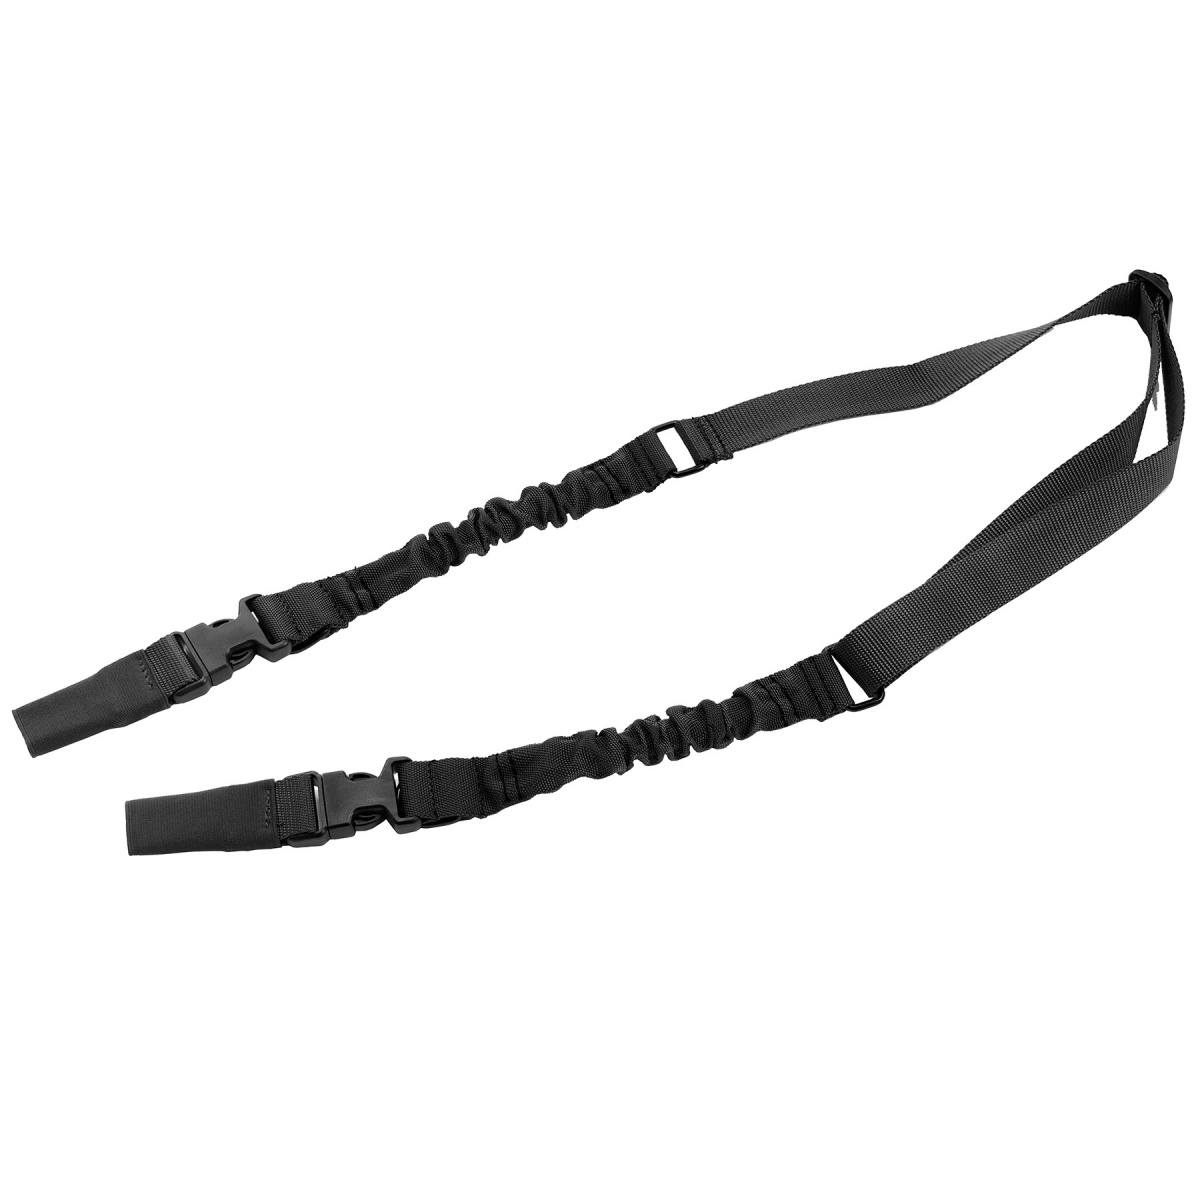 Lancer Tactical 2-Point Bungee Sling with Dual Buckles (Color: Black ...